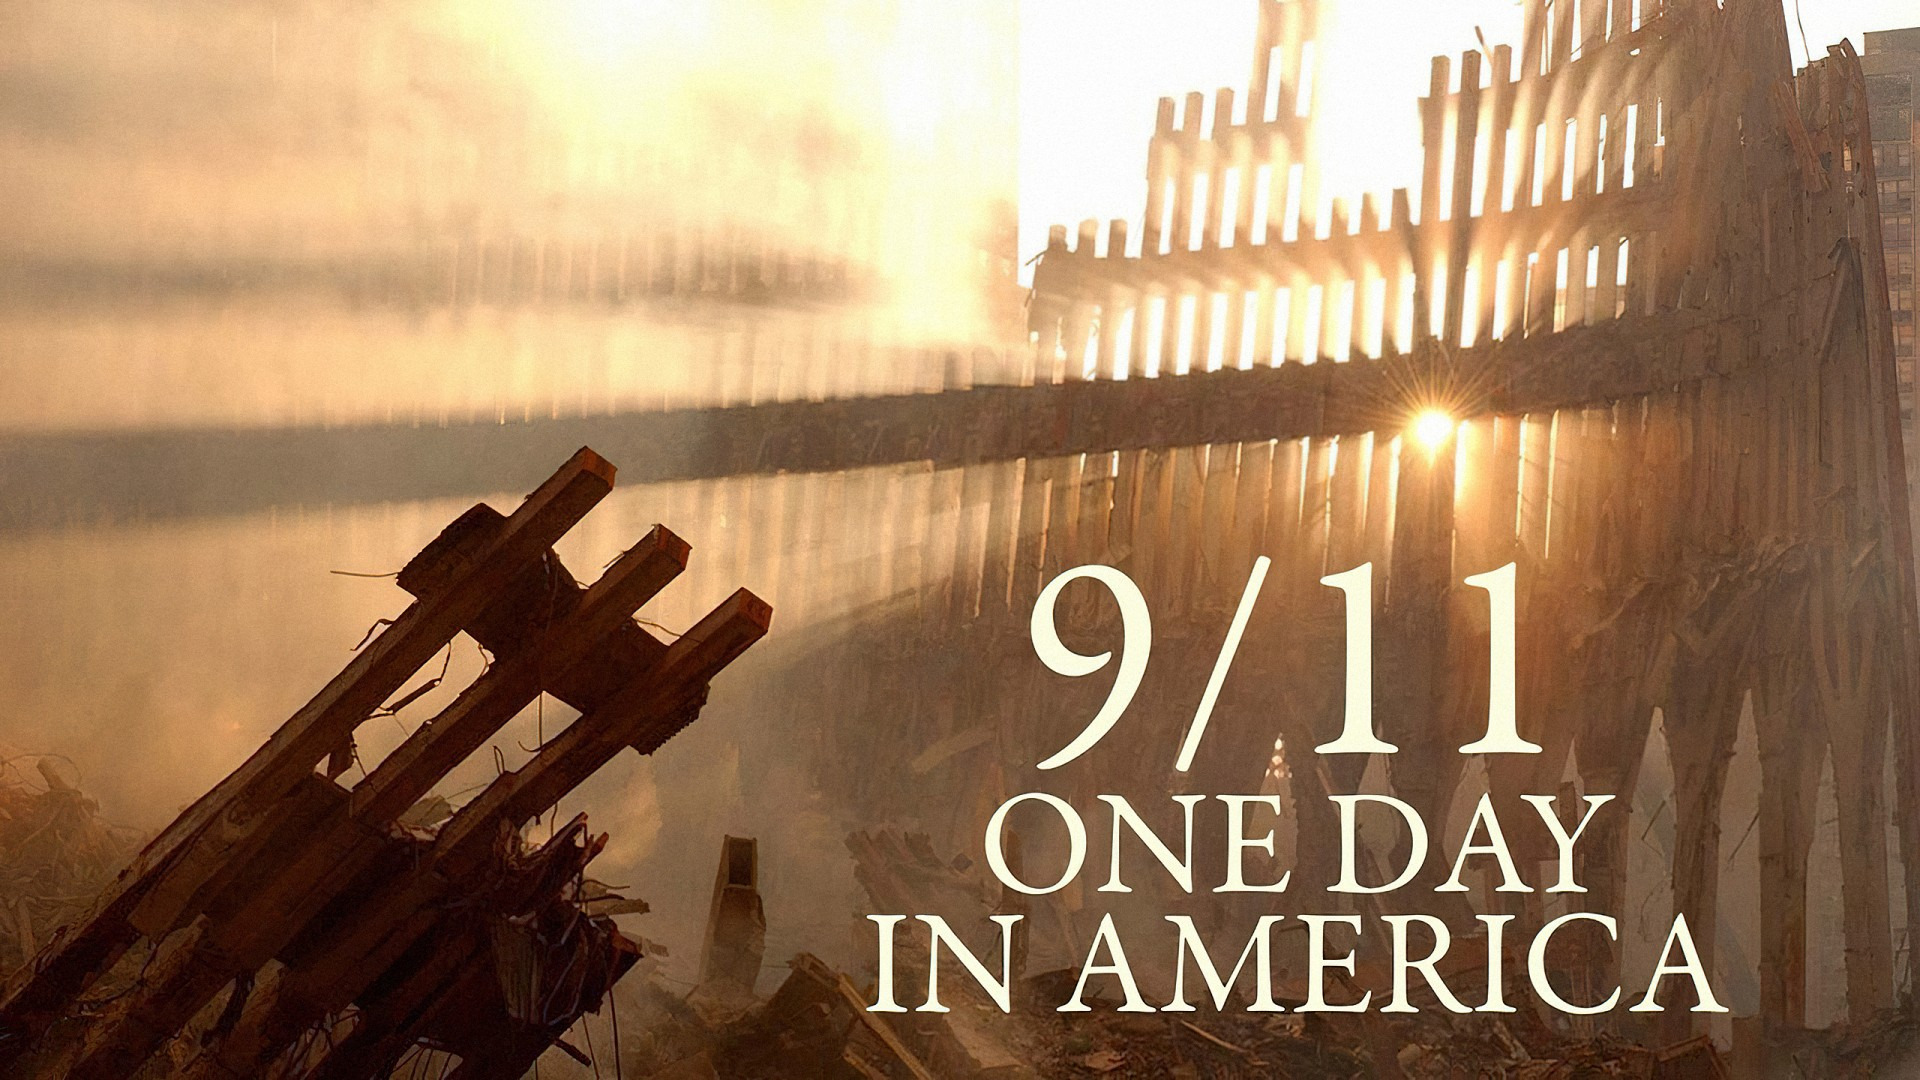 Show 9/11 One Day in America